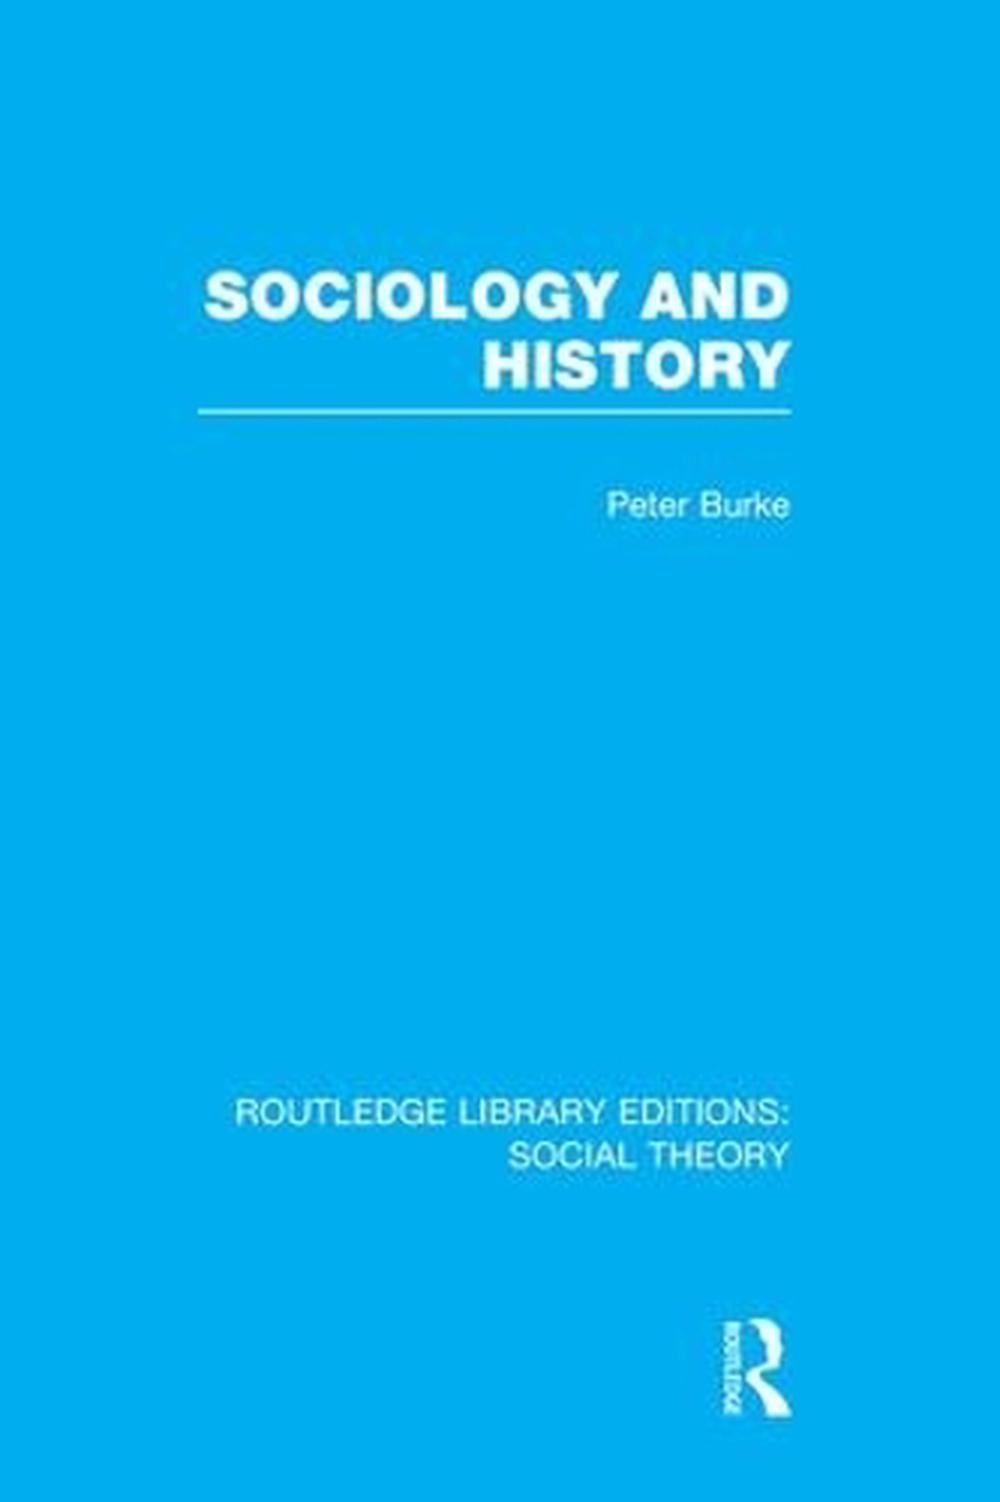 Sociology and History by Peter Burke (English) Paperback Book Free ...